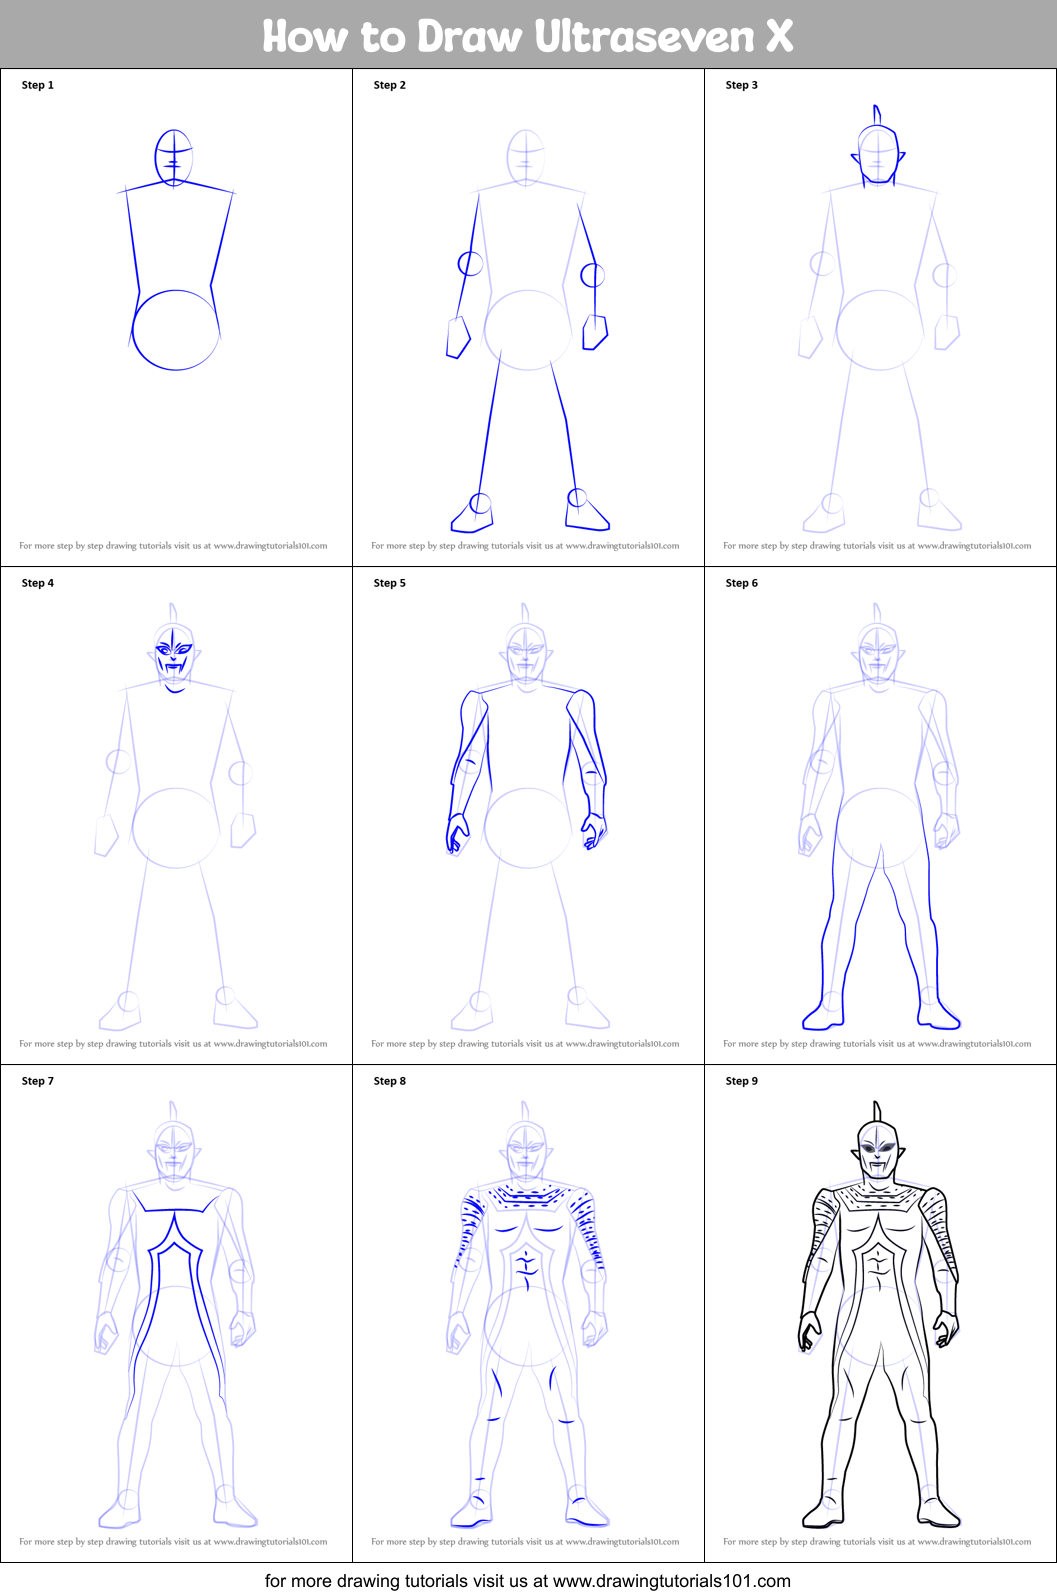 how to draw ultraseven x printable step by step drawing sheet drawingtutorials101 com